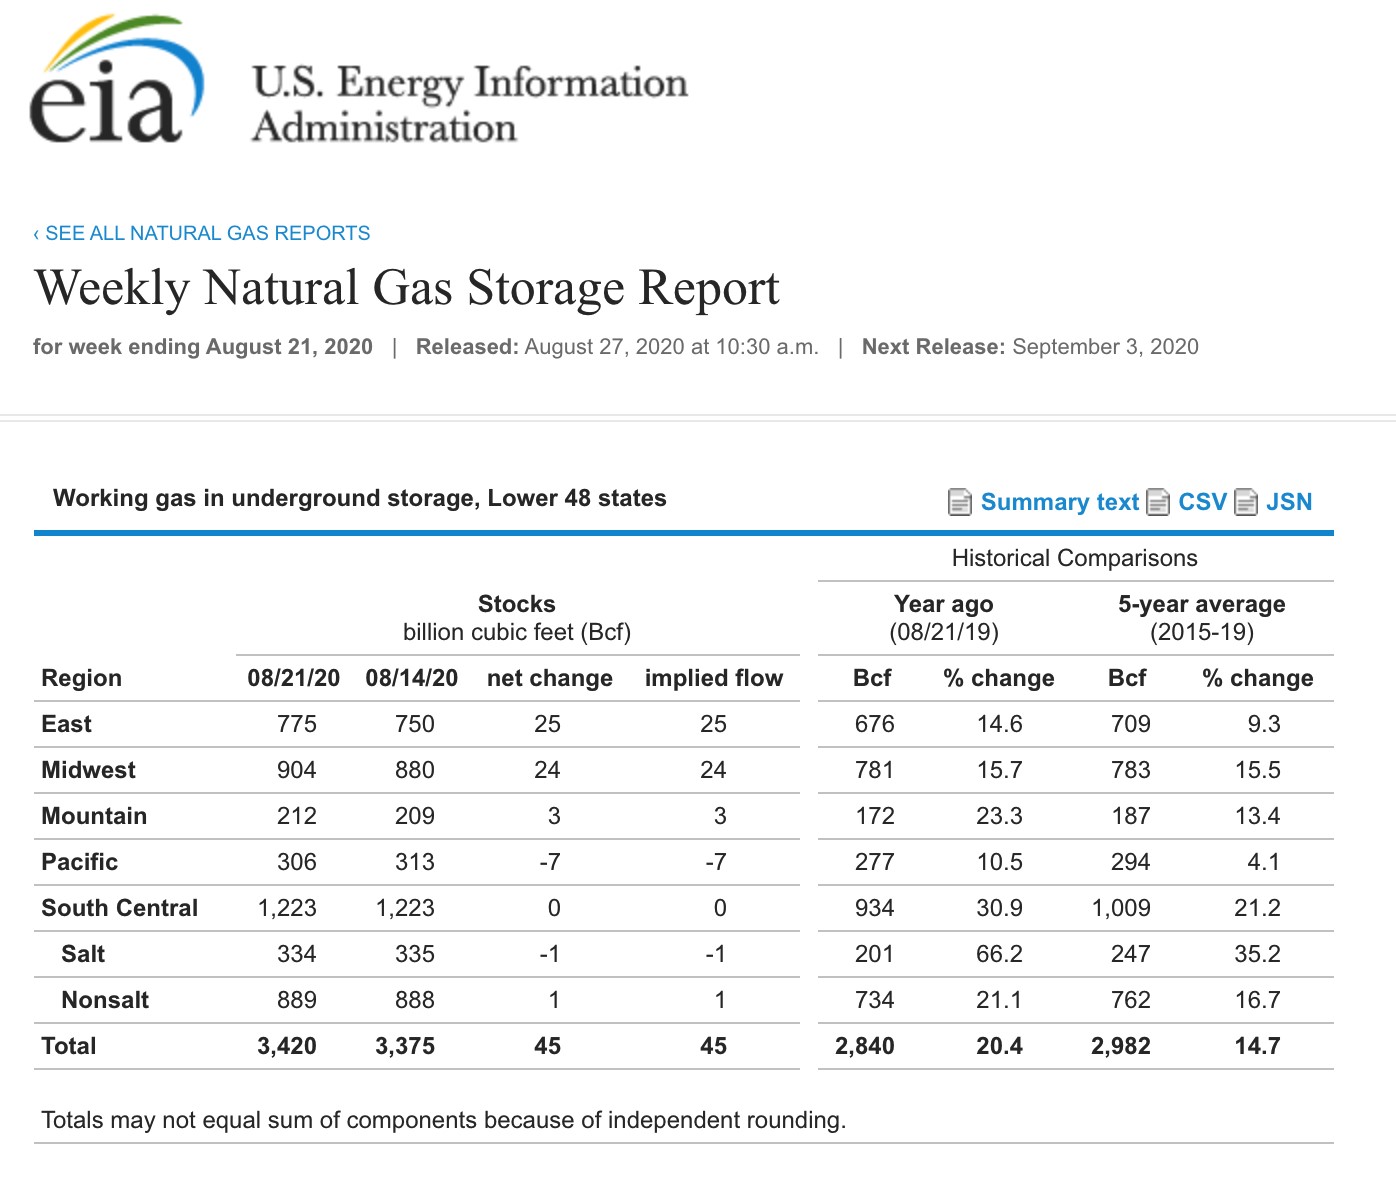 Weekly Natural Gas Storage Report.